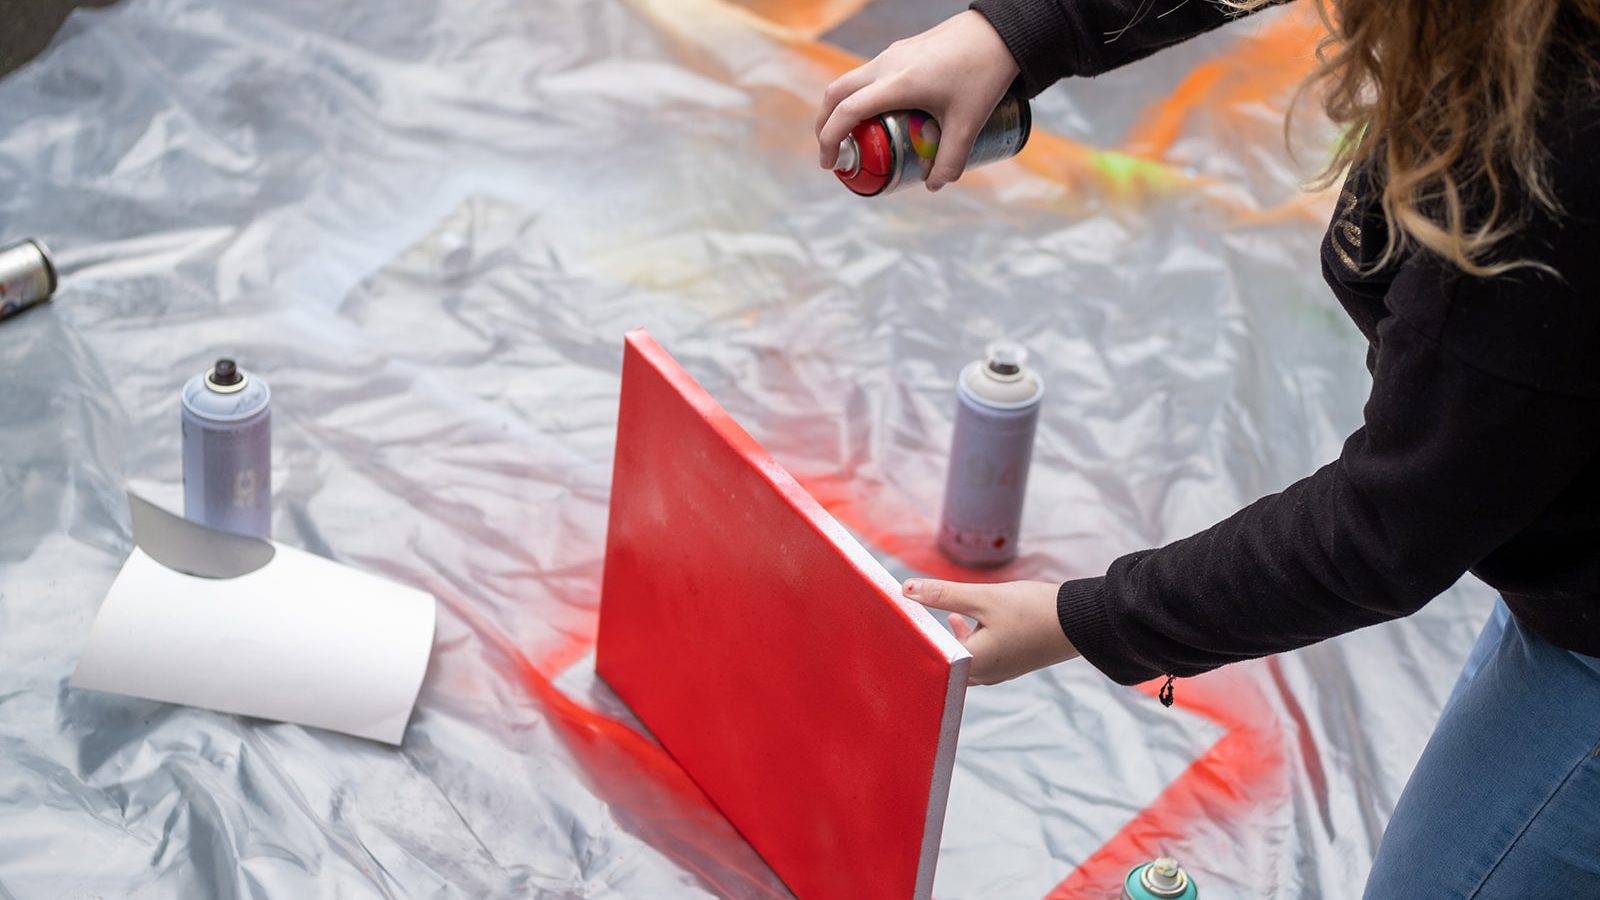 On a large sheet of plastic someone spray paints a white canvas with bright red spray paint.